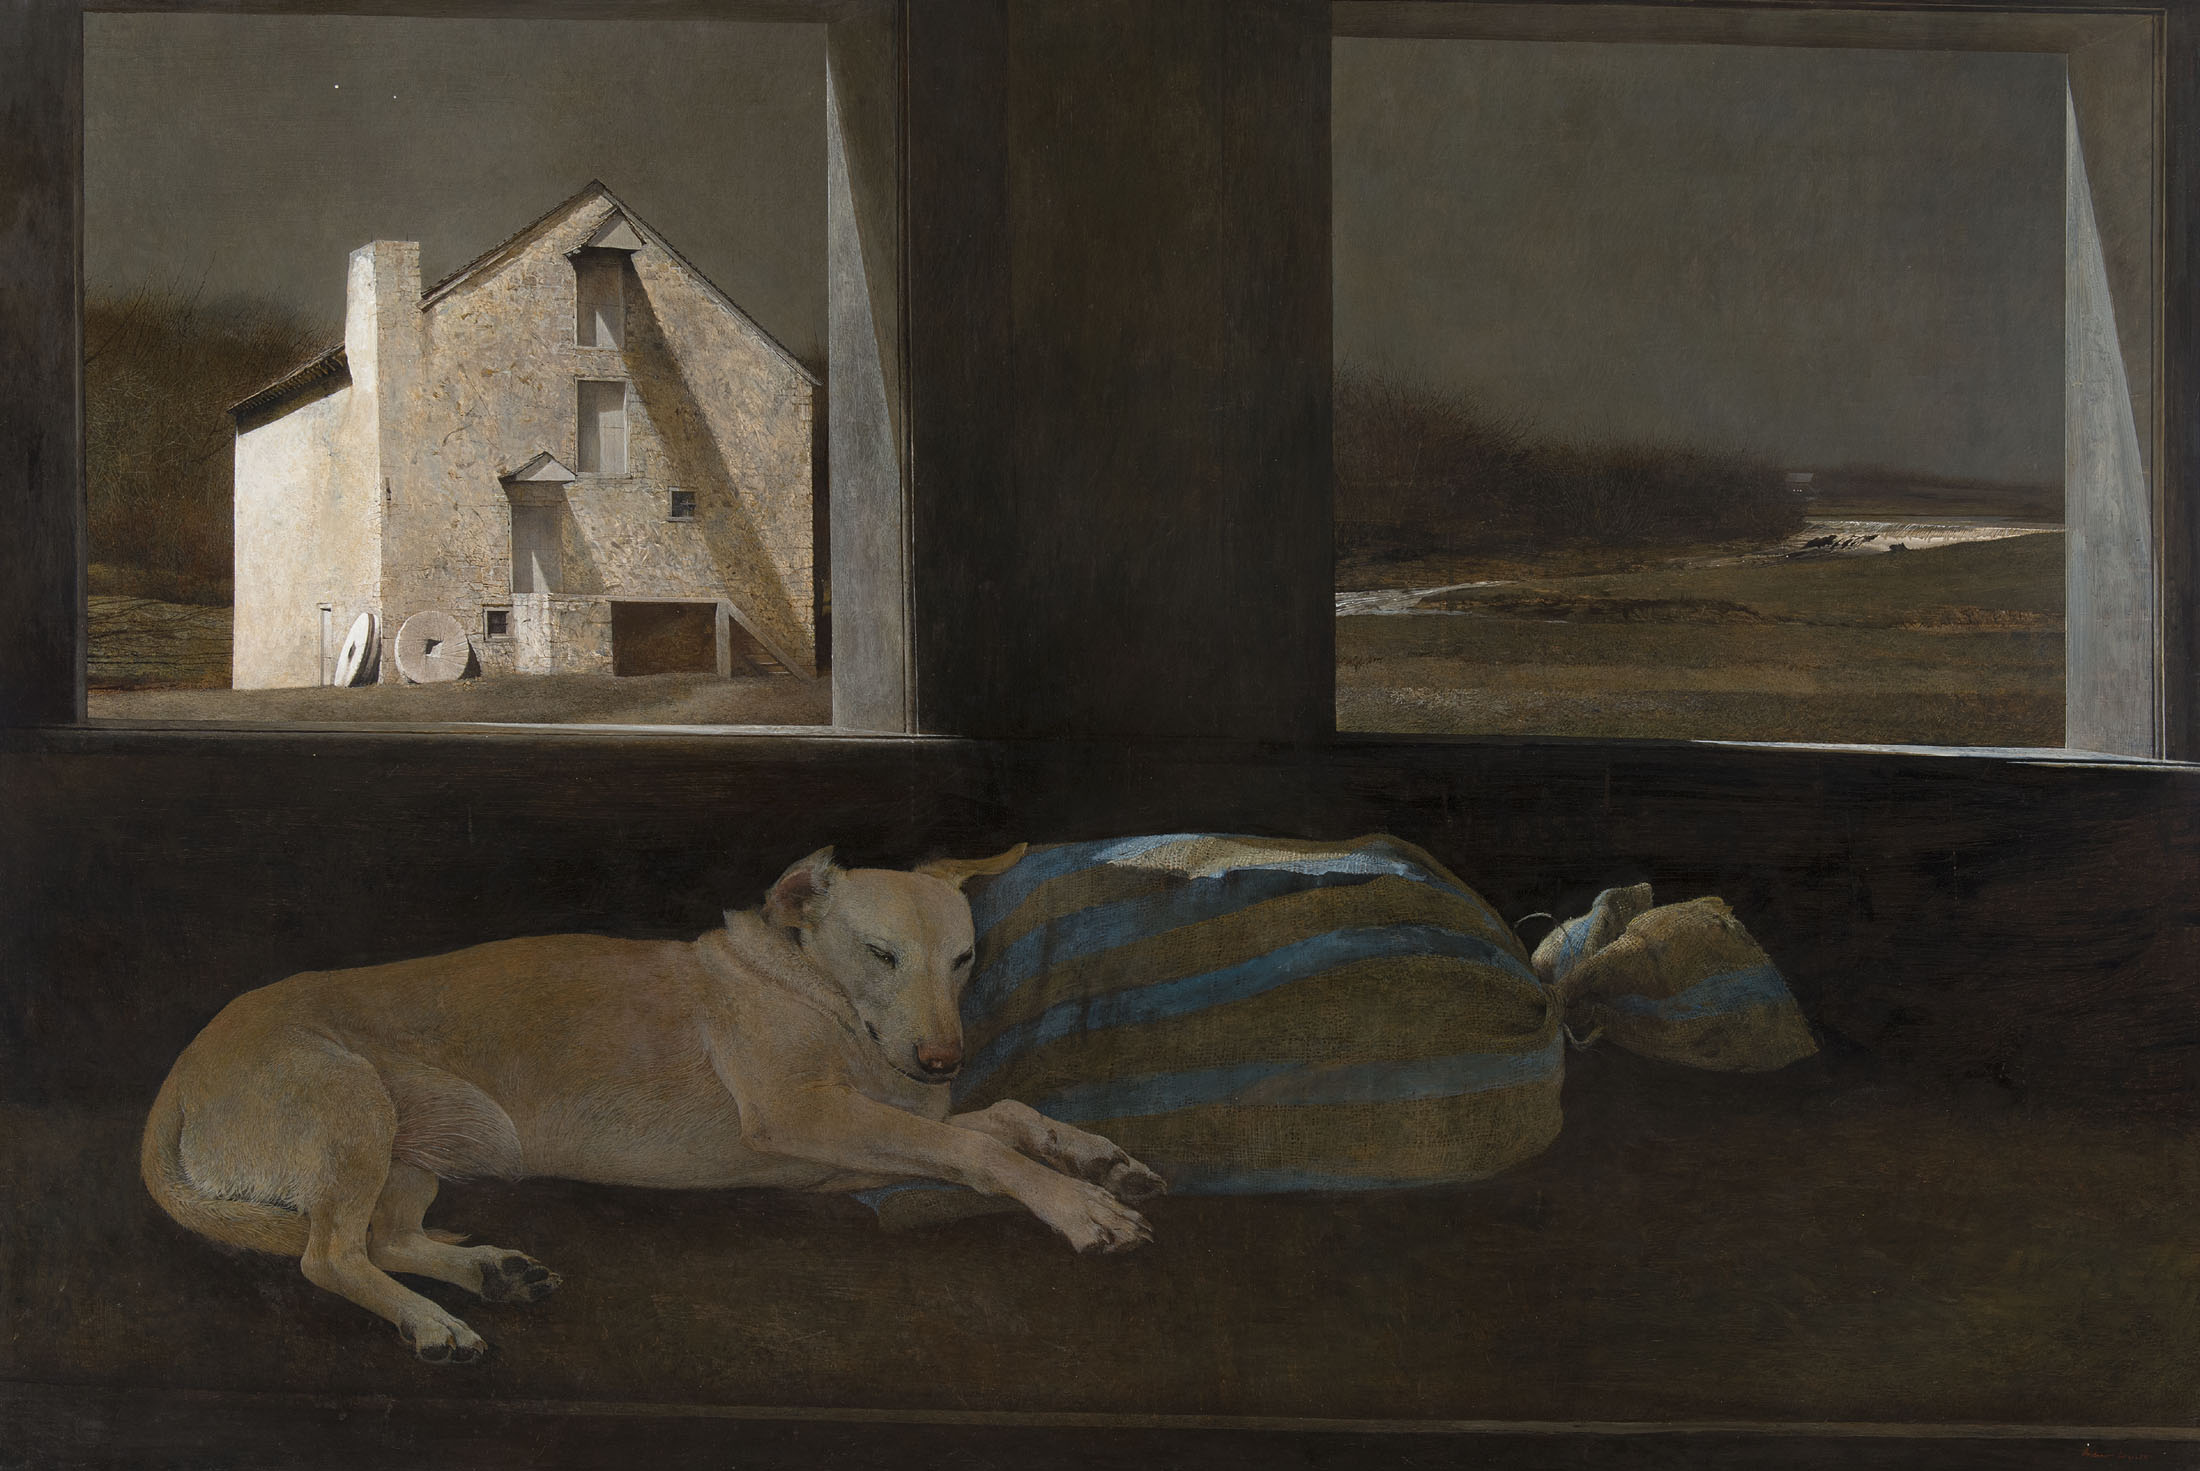 Andrew Wyeth (1917 - 2009), Night Sleeper, 1979, tempera on panel, 48 x 72 in. The Andrew and Betsy Wyeth Collection. © 2021 Andrew Wyeth/Artists Rights Society (ARS), NY